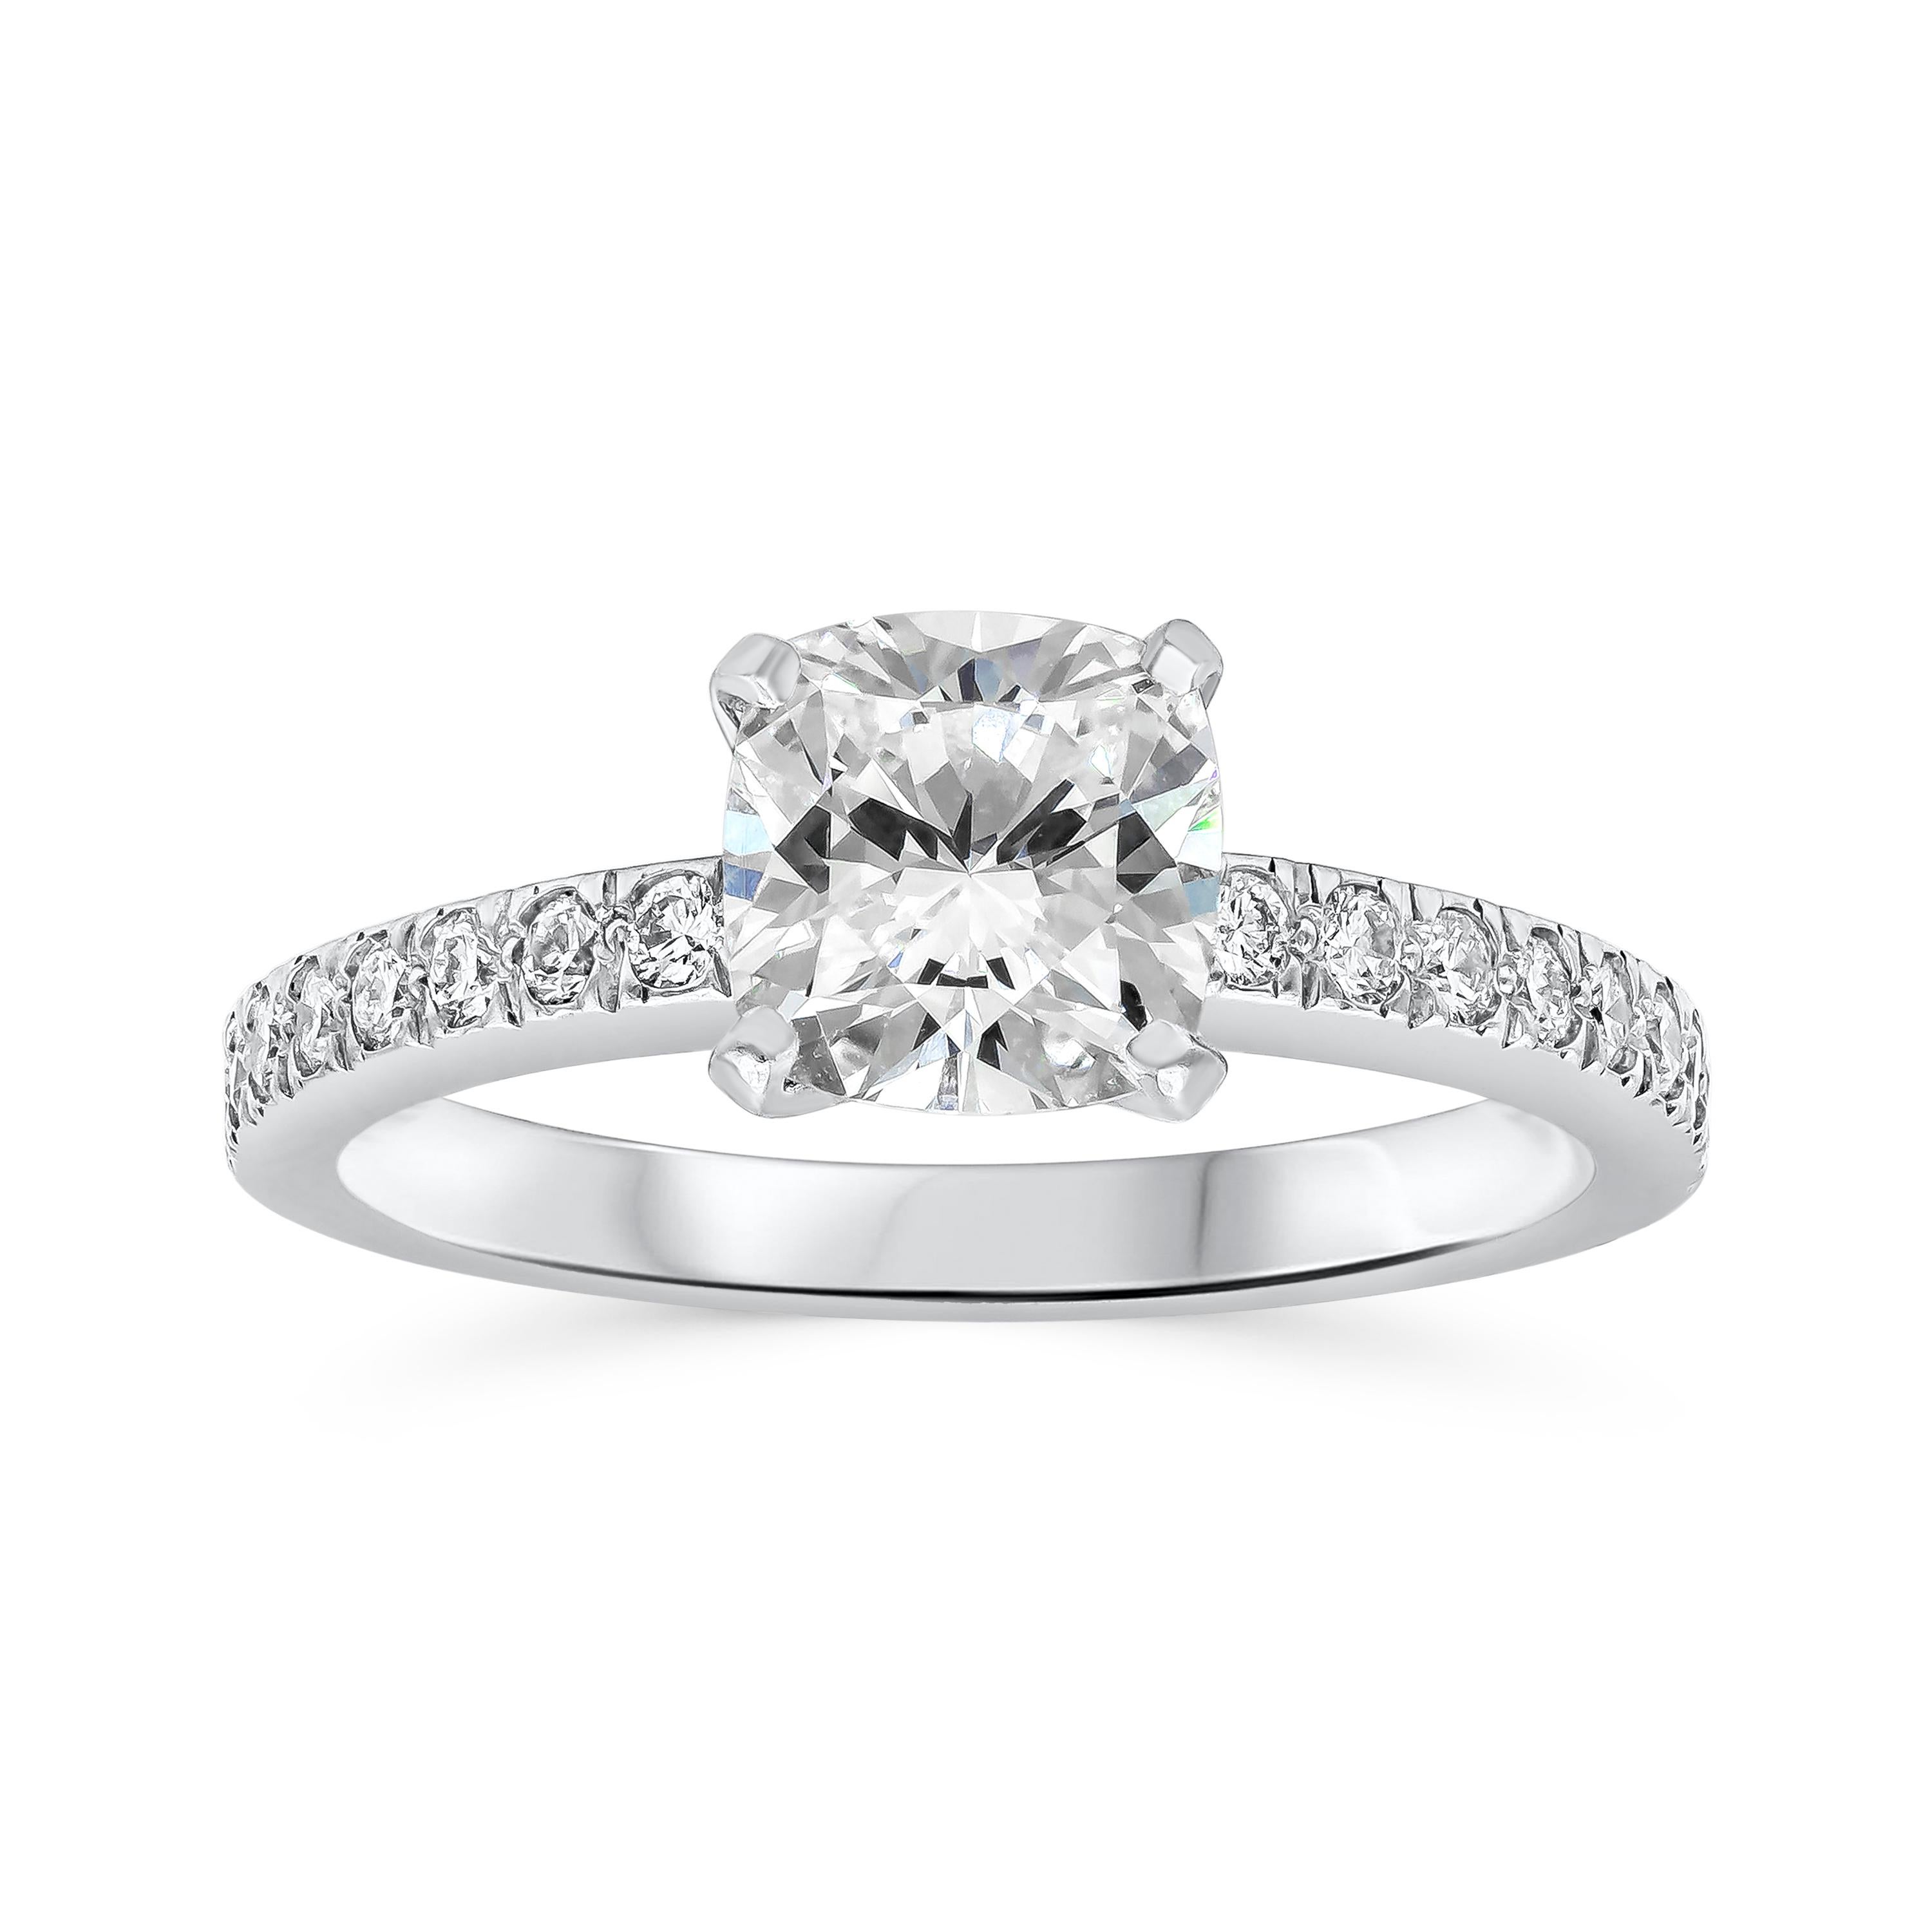 This ring features a 1.01 carat cushion cut diamond, H Color and VS1 in Clarity. Accented by a row of  round brilliant diamonds set half way down the band weighing 0.16 carats total. 
The wedding band is eternity set with round brilliant diamonds